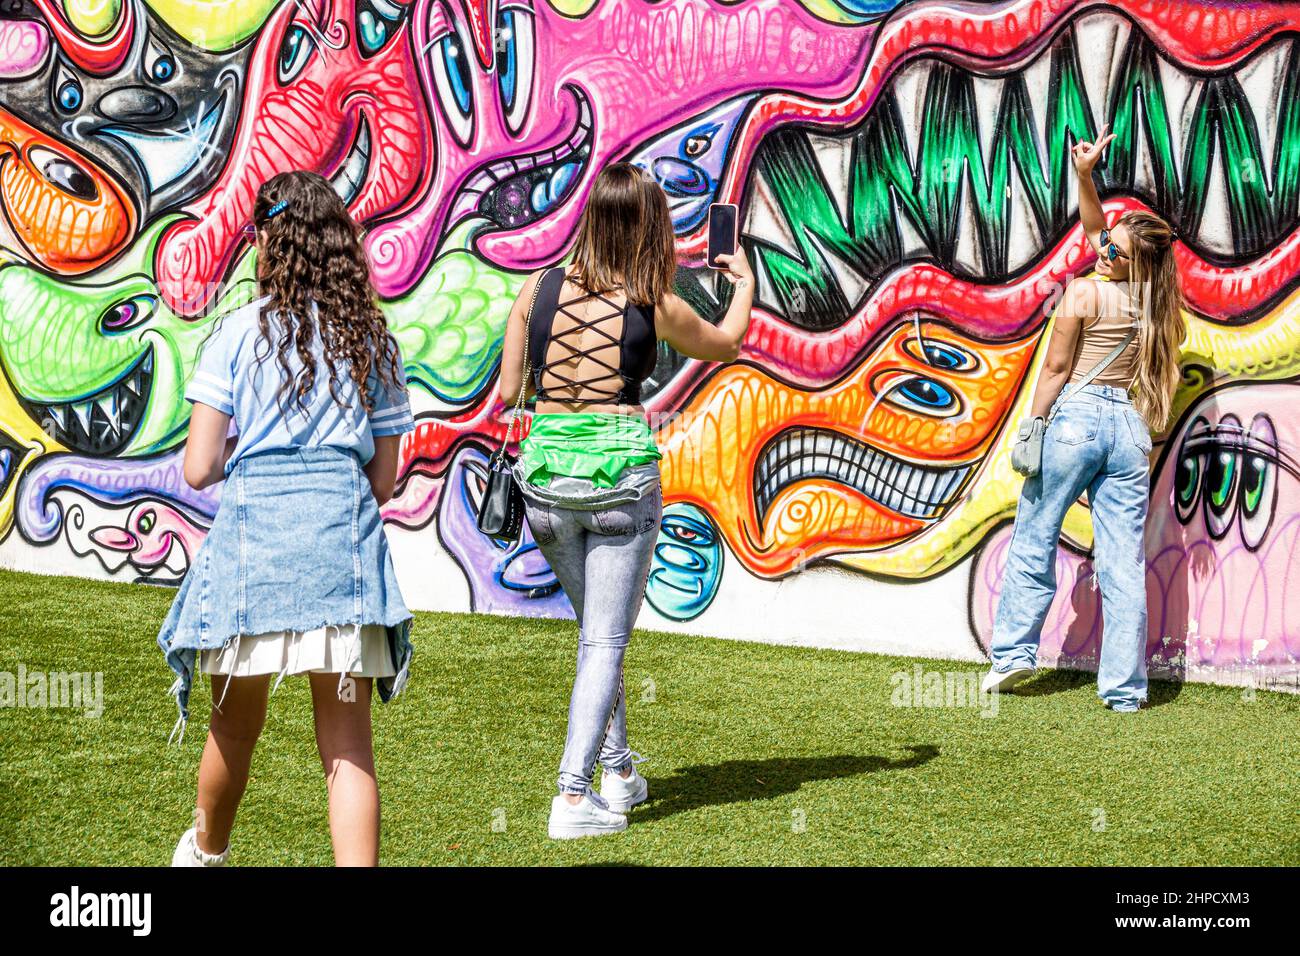 Miami Florida Wynwood Art District artwork wall visitors women friends posing teen teens teenage teenager teenagers,youth culture friends adolescent,resident residents girl girls,taking photo Stock Photo